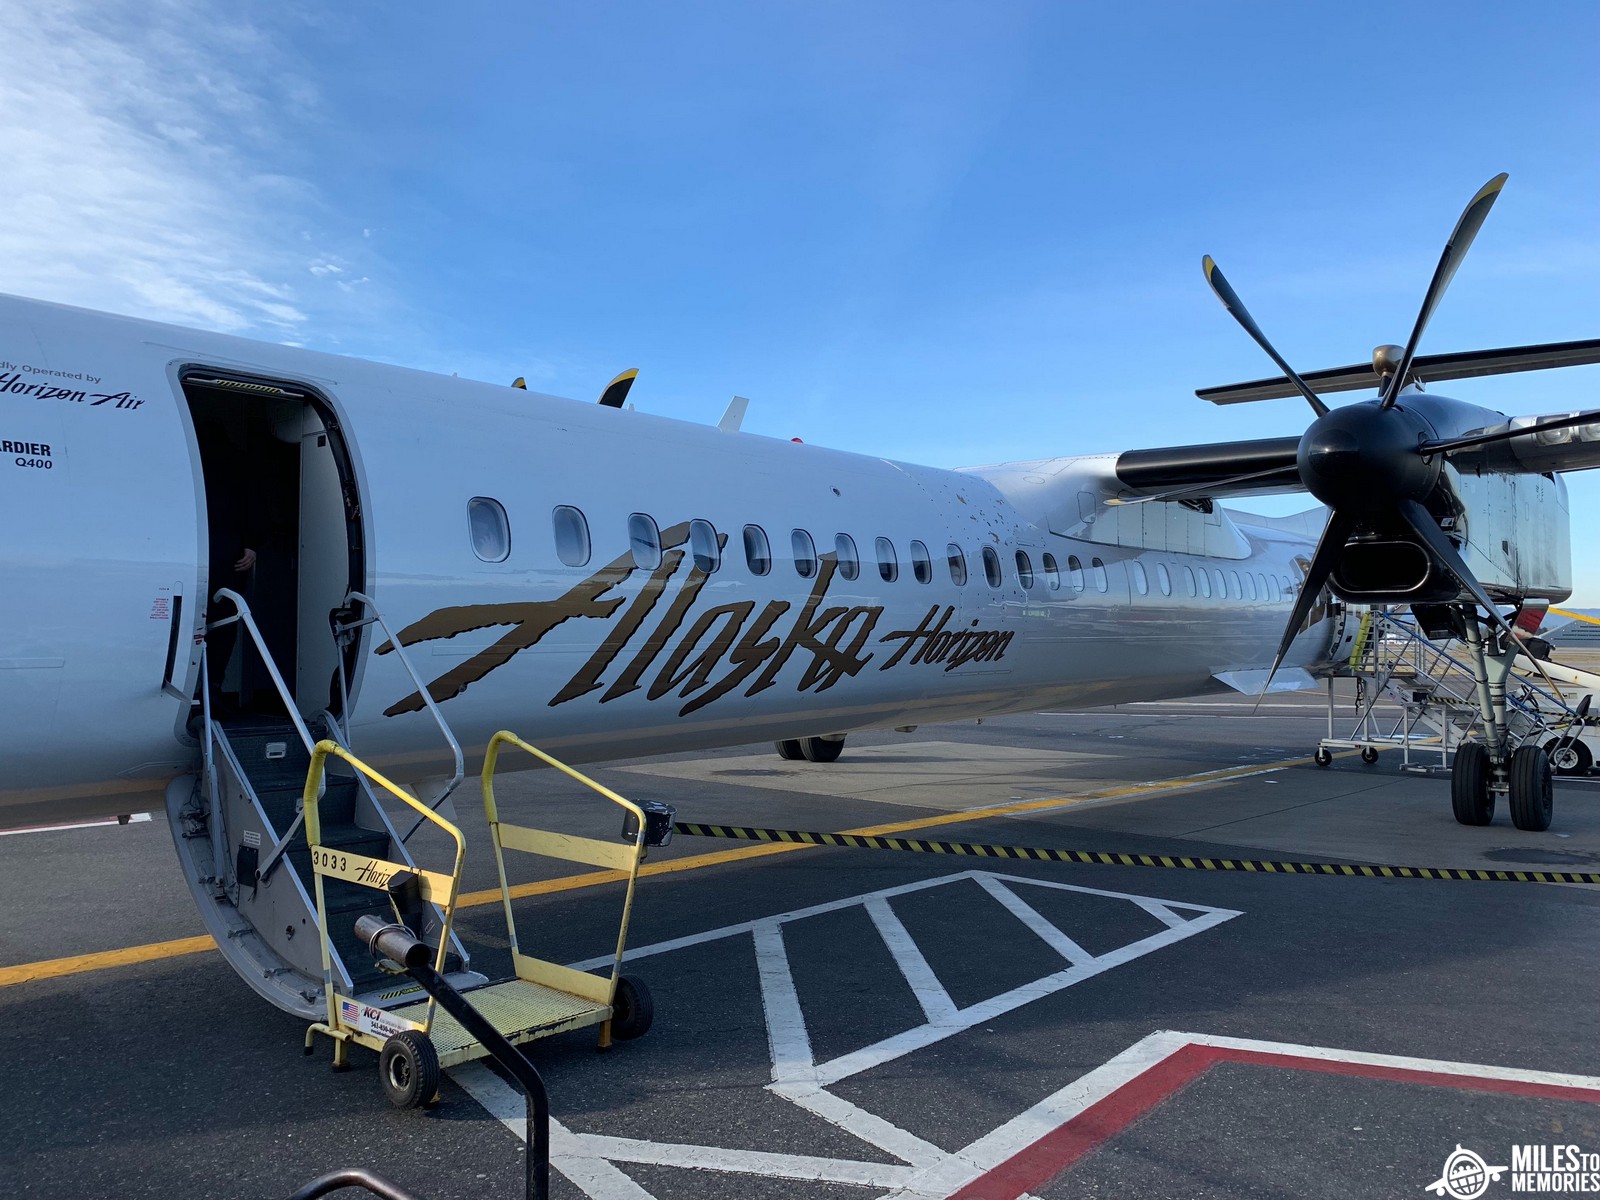 Alaska Airlines Mileage Plan Shopping Mall Promotion